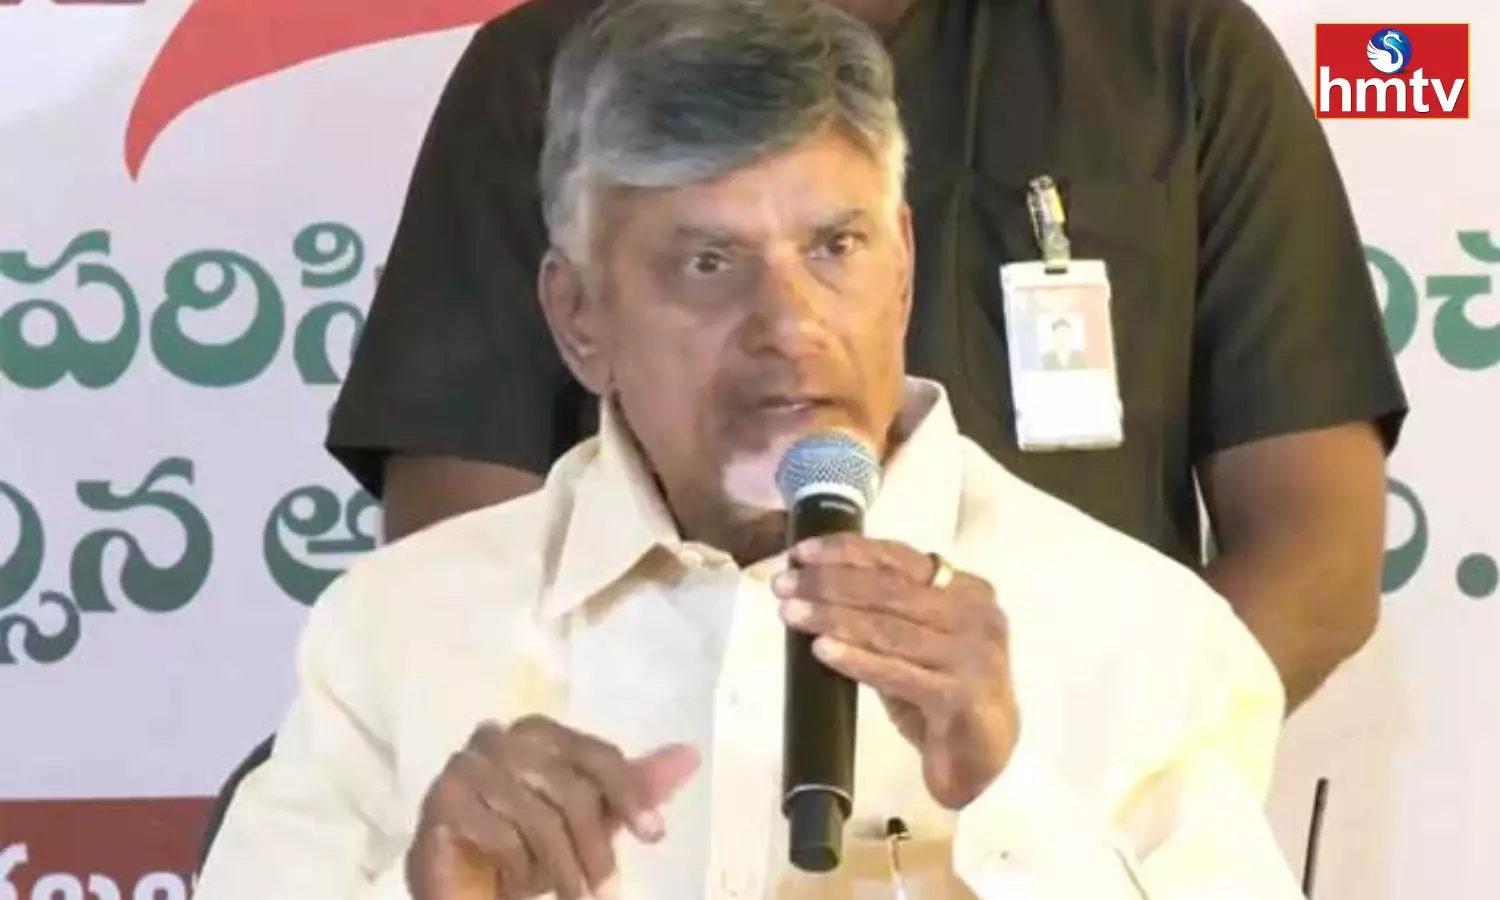 The Development Of the State Requires The Cooperation Of The Centre Says Chandrababu